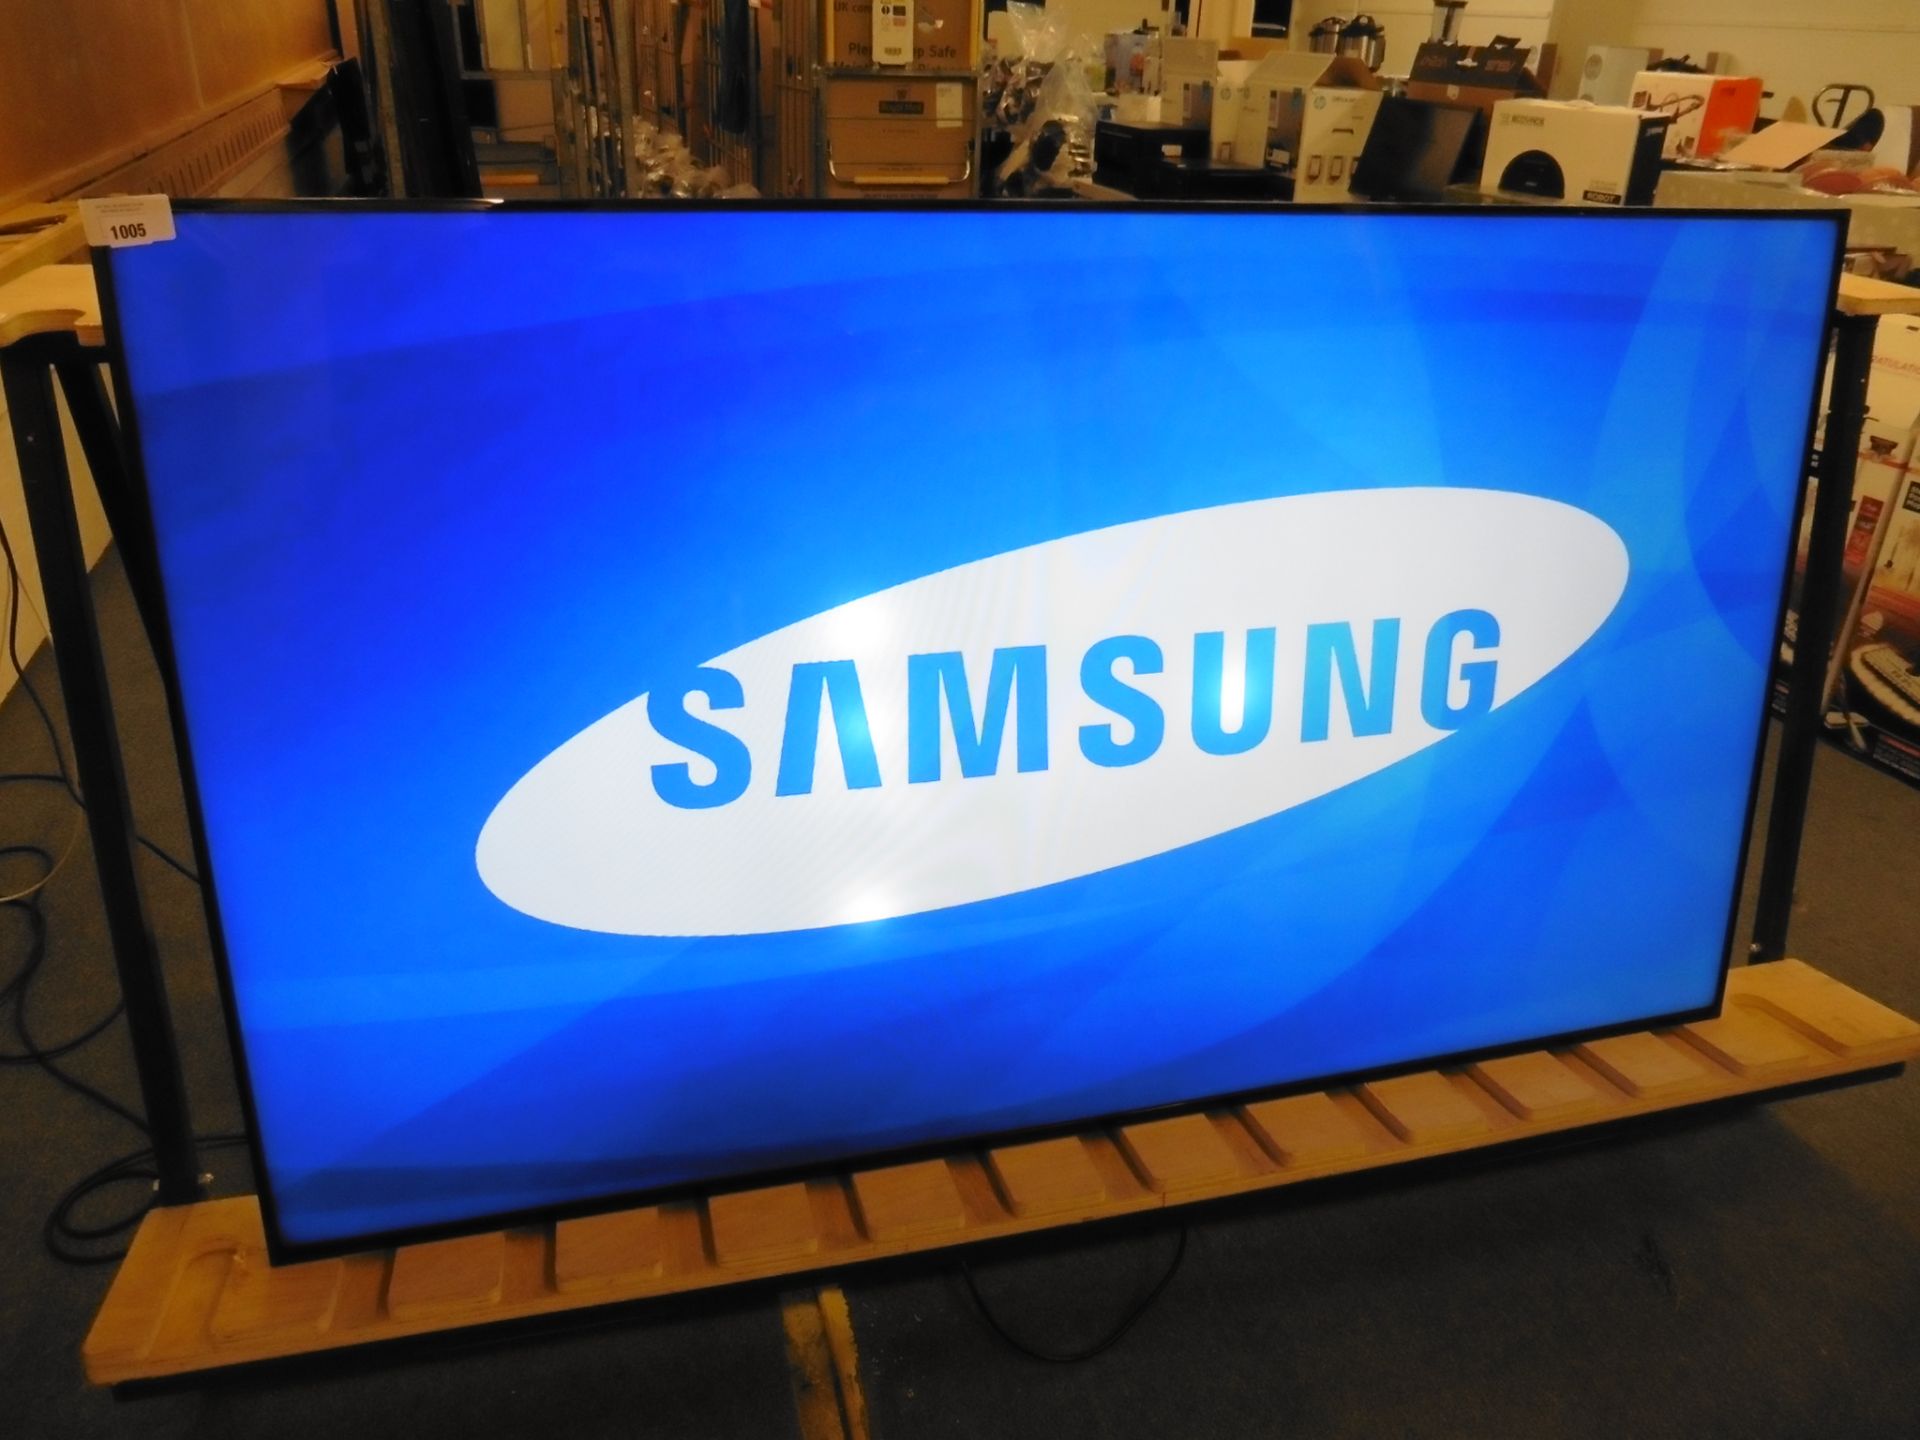 Samsung model LH75DMD professional display screen with remote (manufactured 2015)